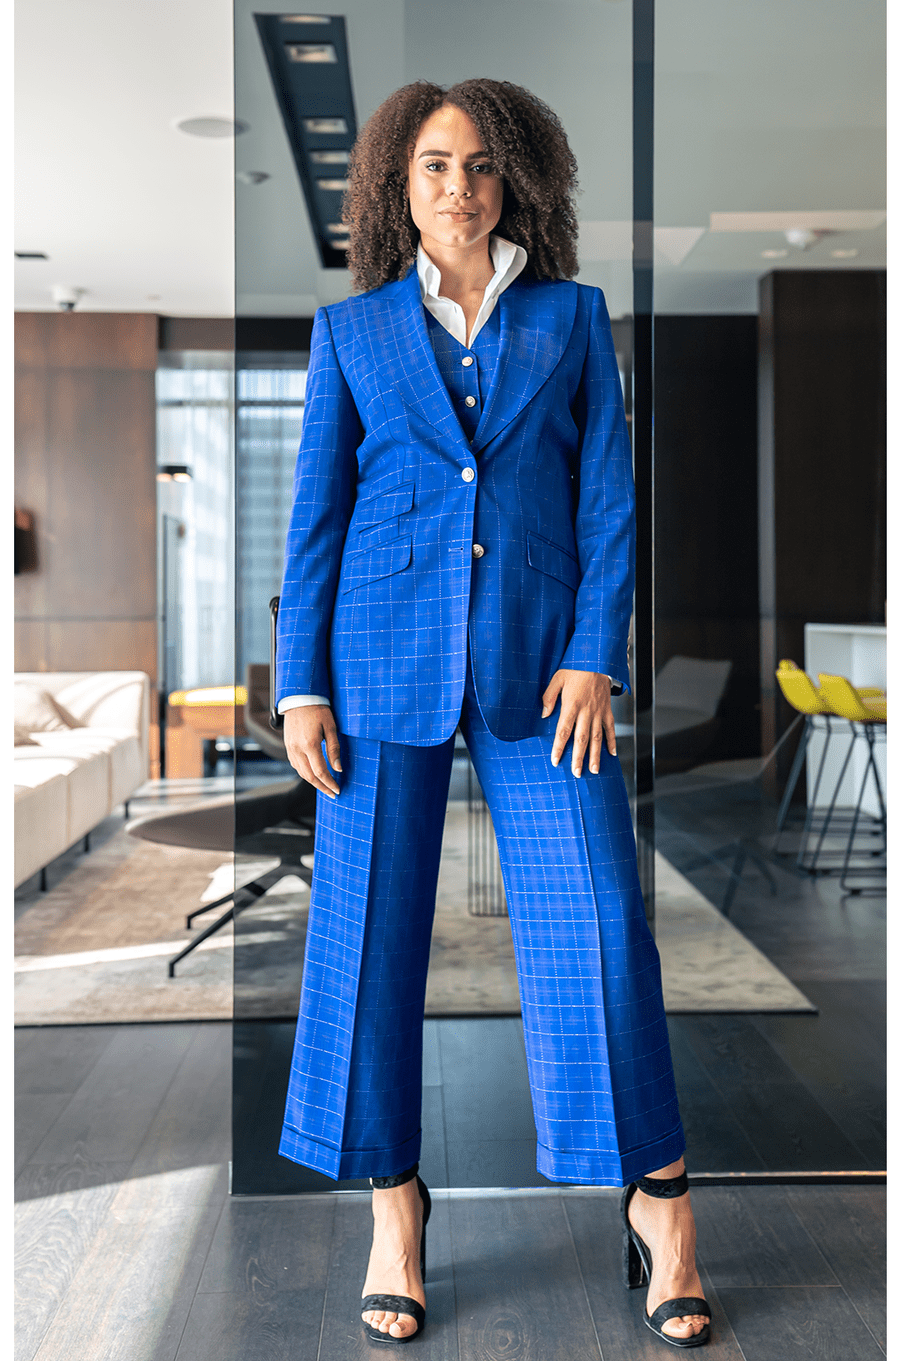 Yingor plaid sapphire blue, single-breasted suit. Crafted in soft poly-wool and decorated with crown aluminum buttons